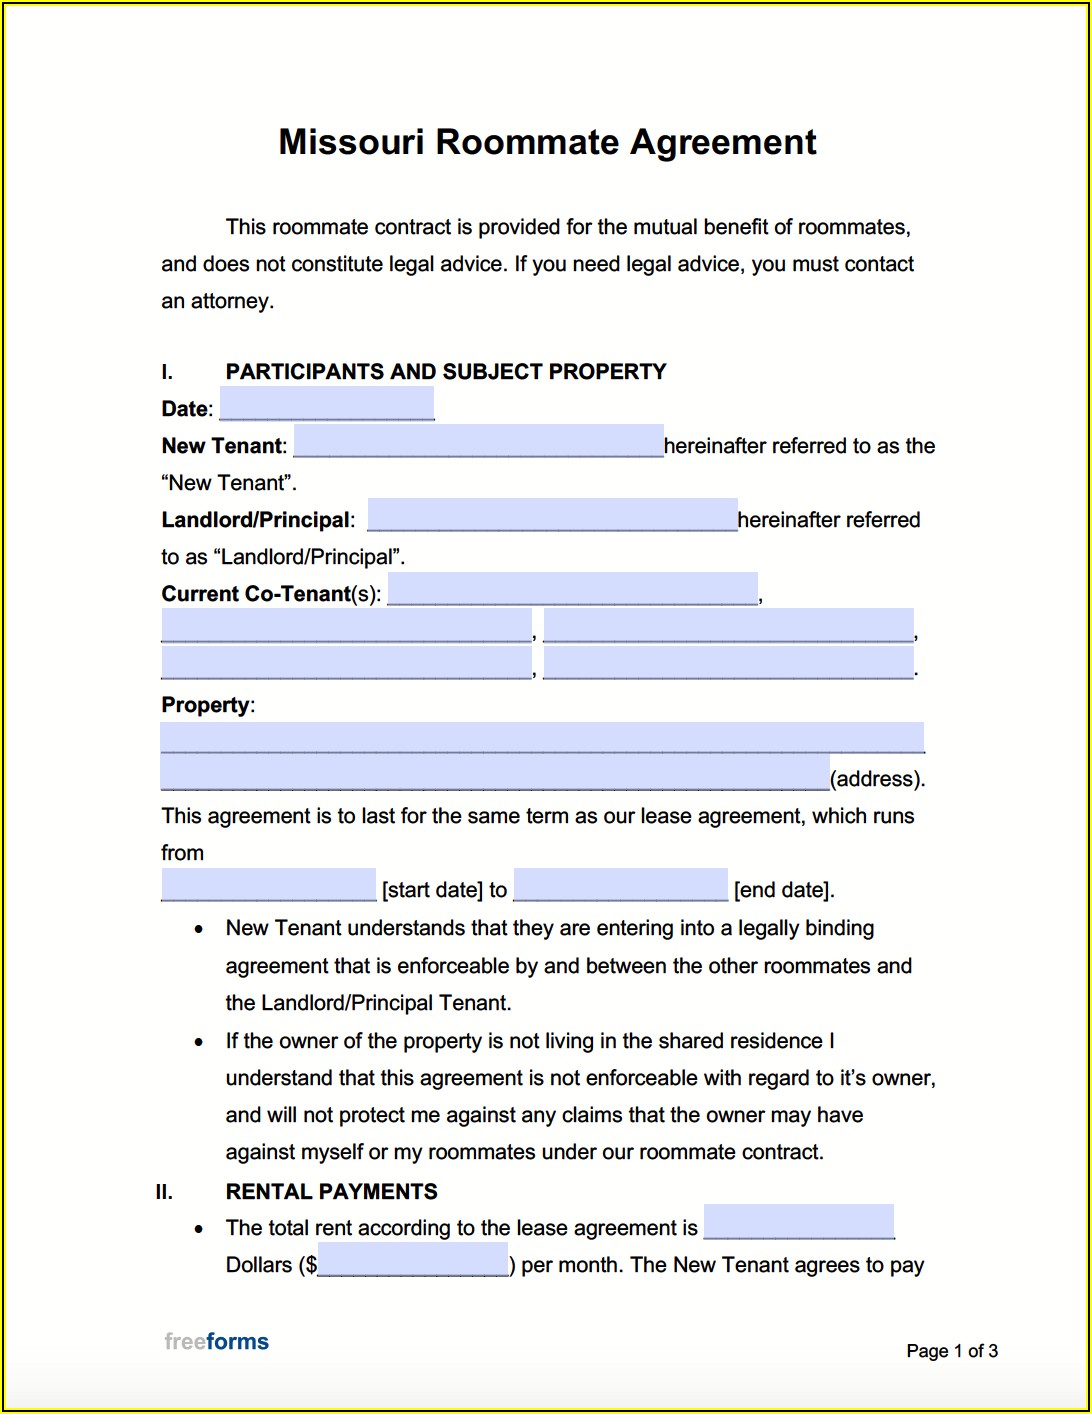 Roommate Agreement Template Free